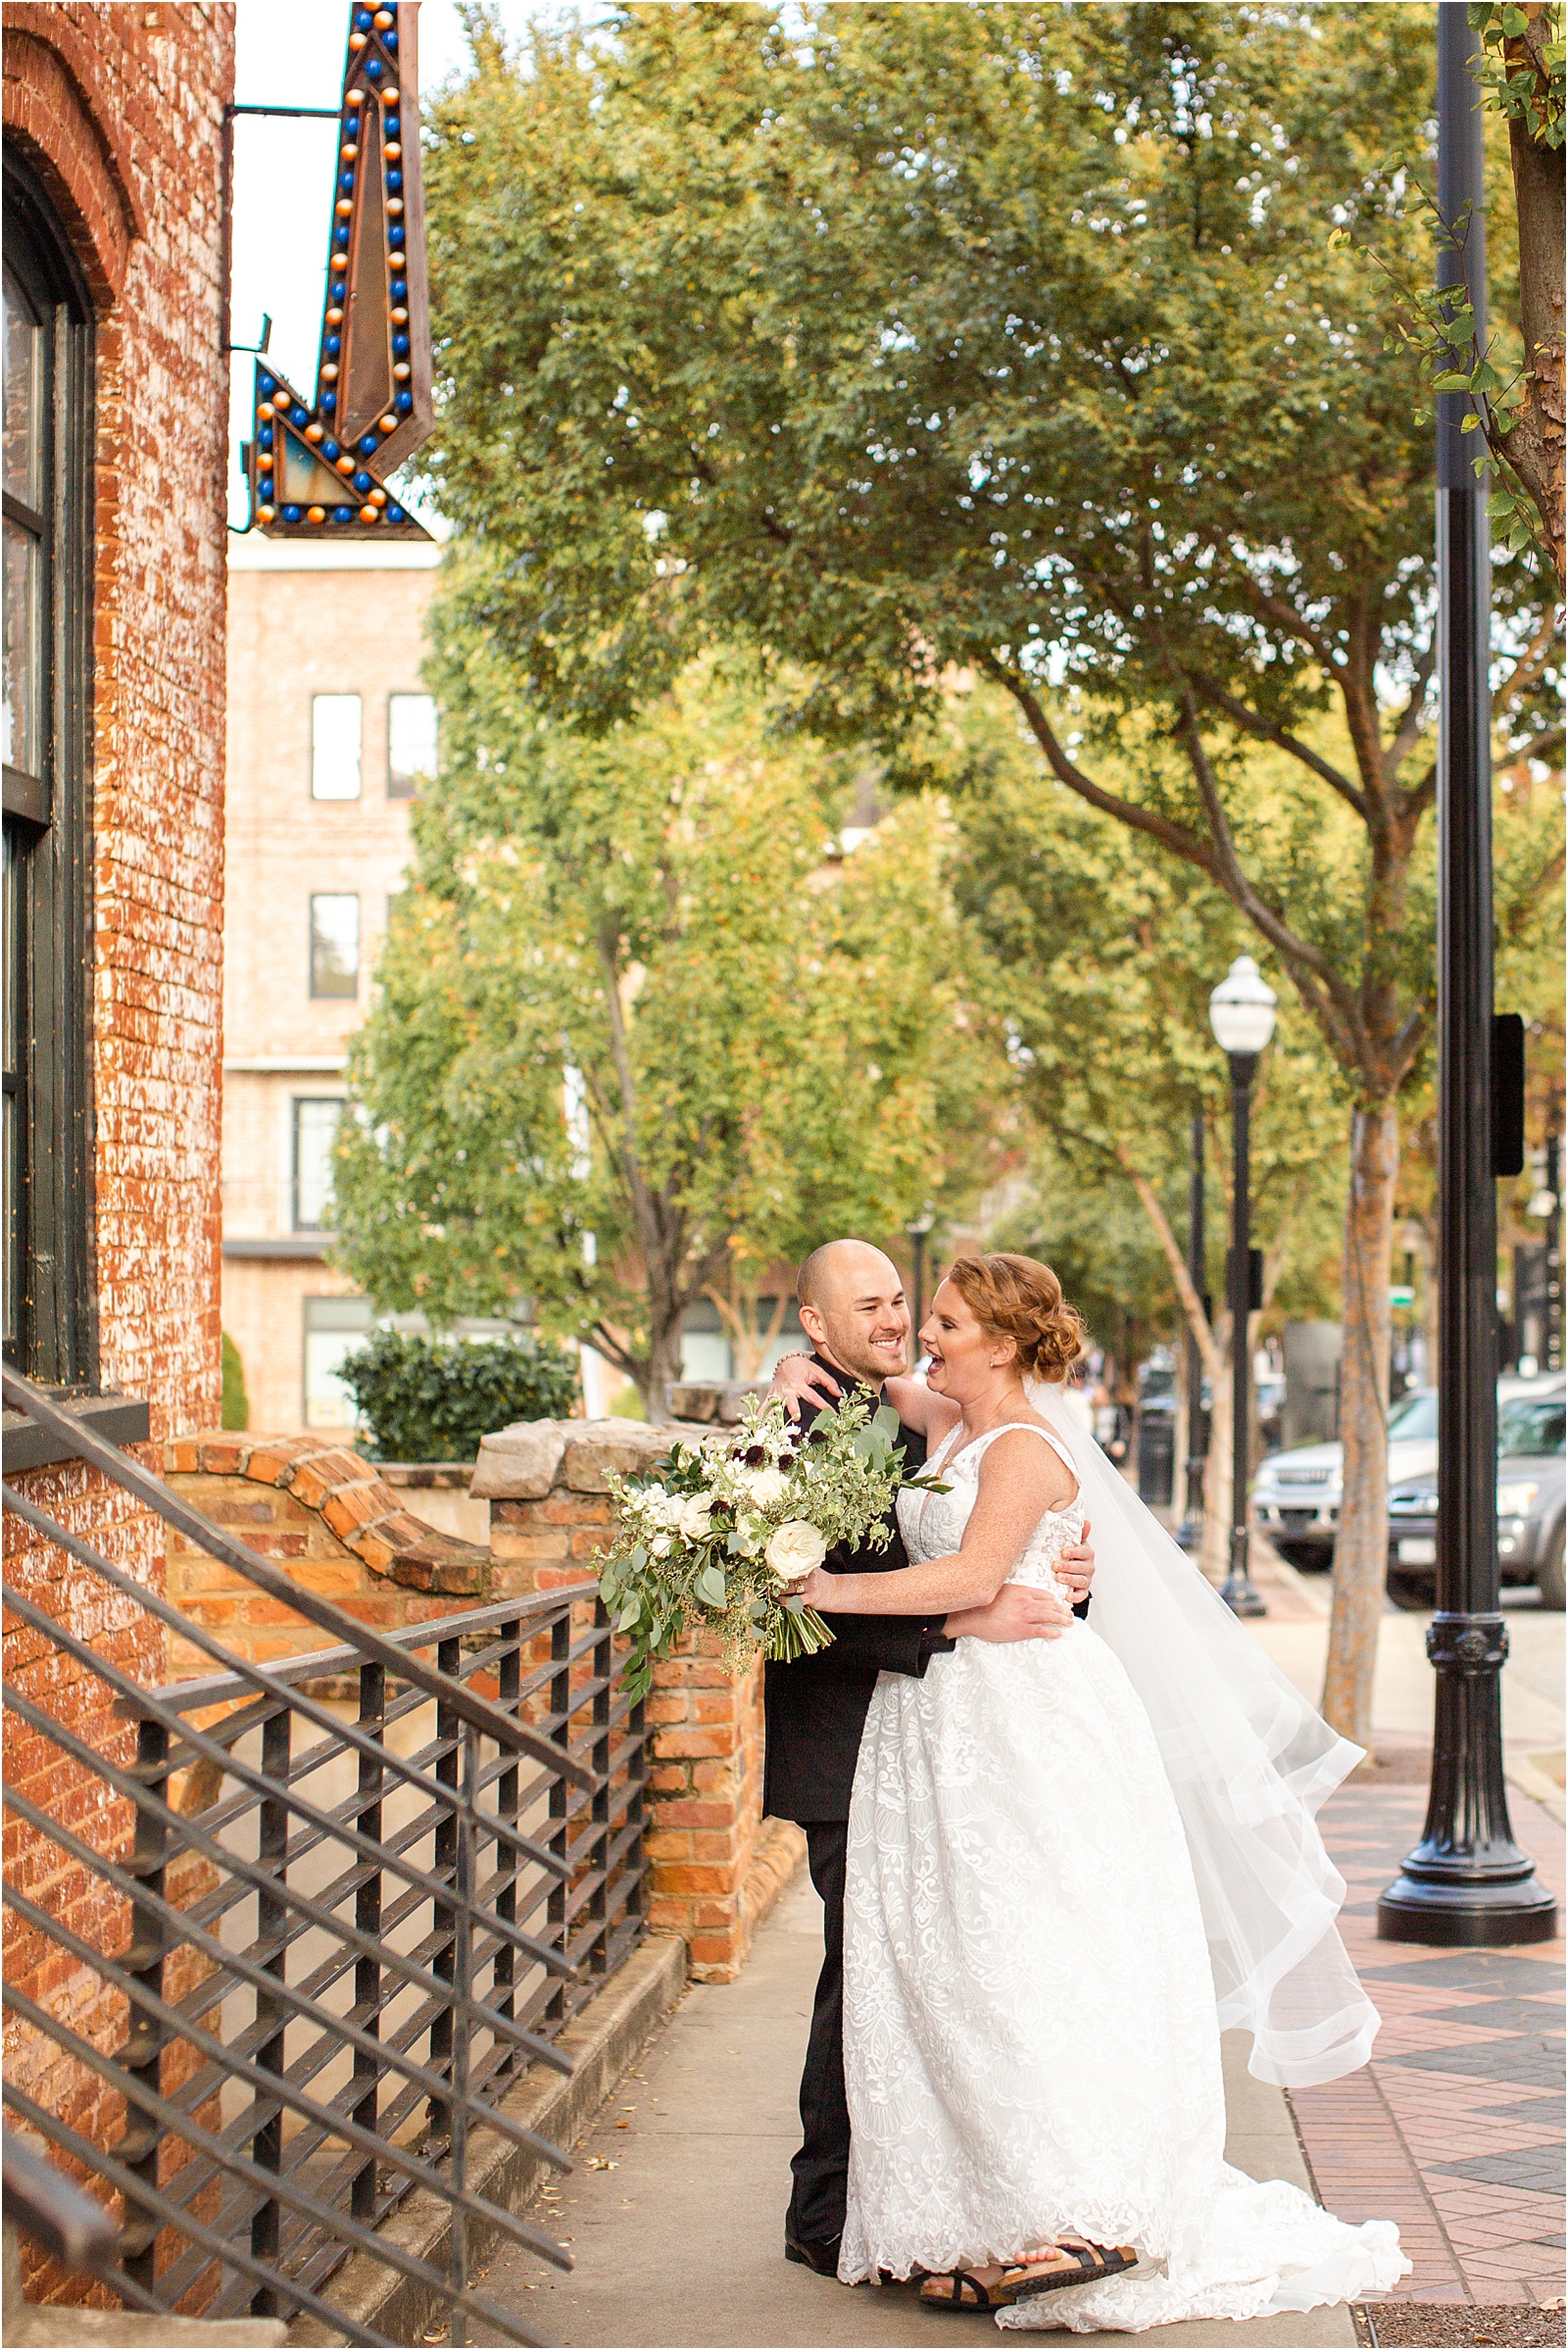 Bride looks at her new husband and laughs in Downtown Greenville street